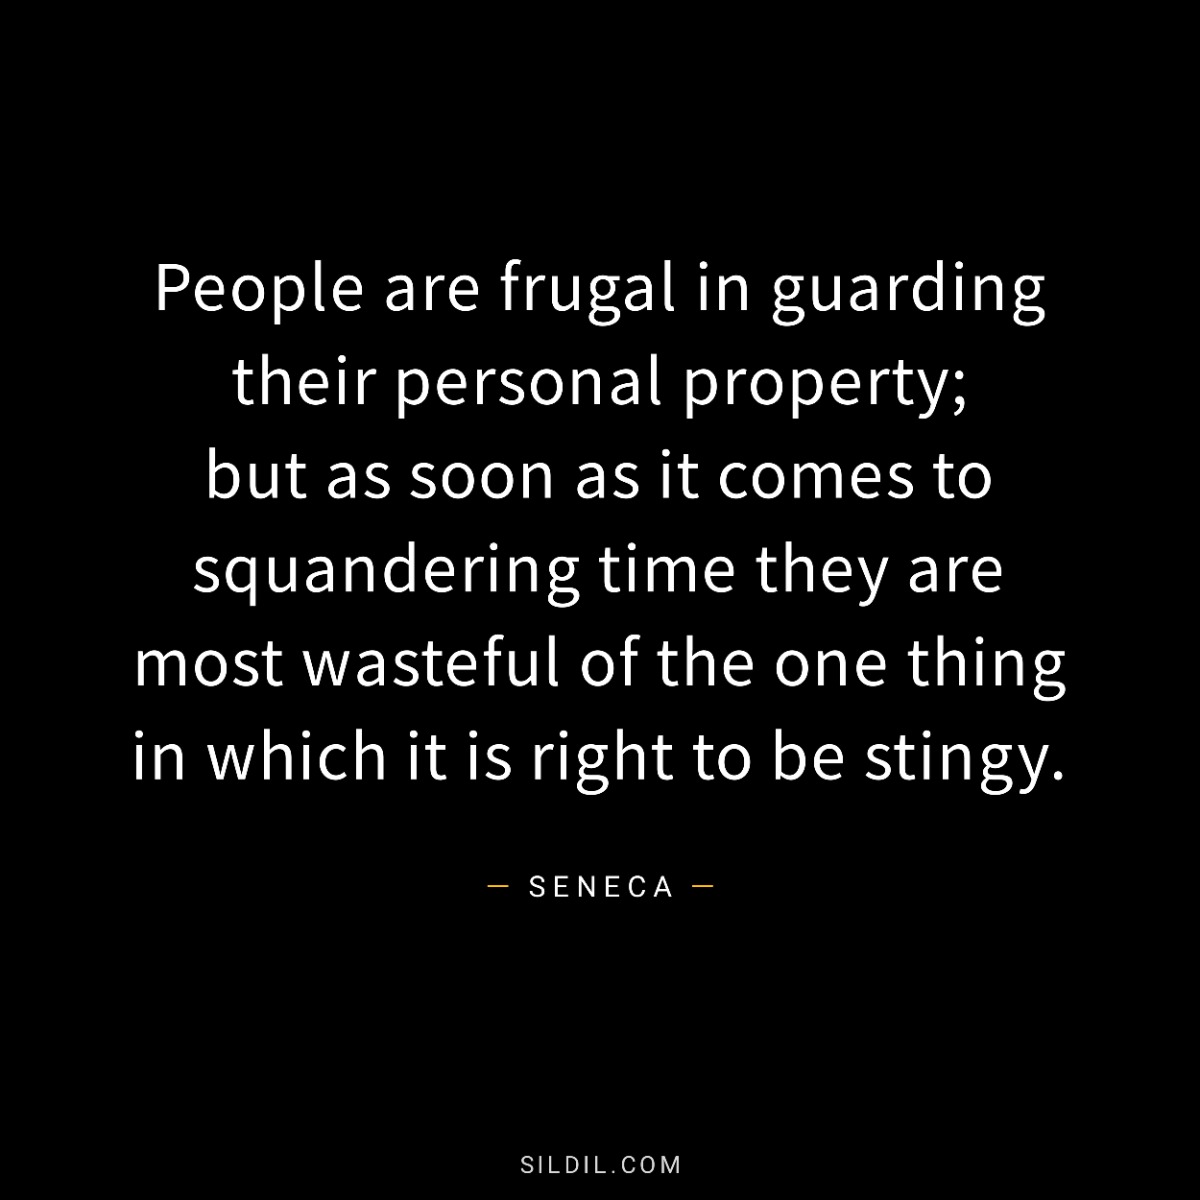 People are frugal in guarding their personal property; but as soon as it comes to squandering time they are most wasteful of the one thing in which it is right to be stingy.